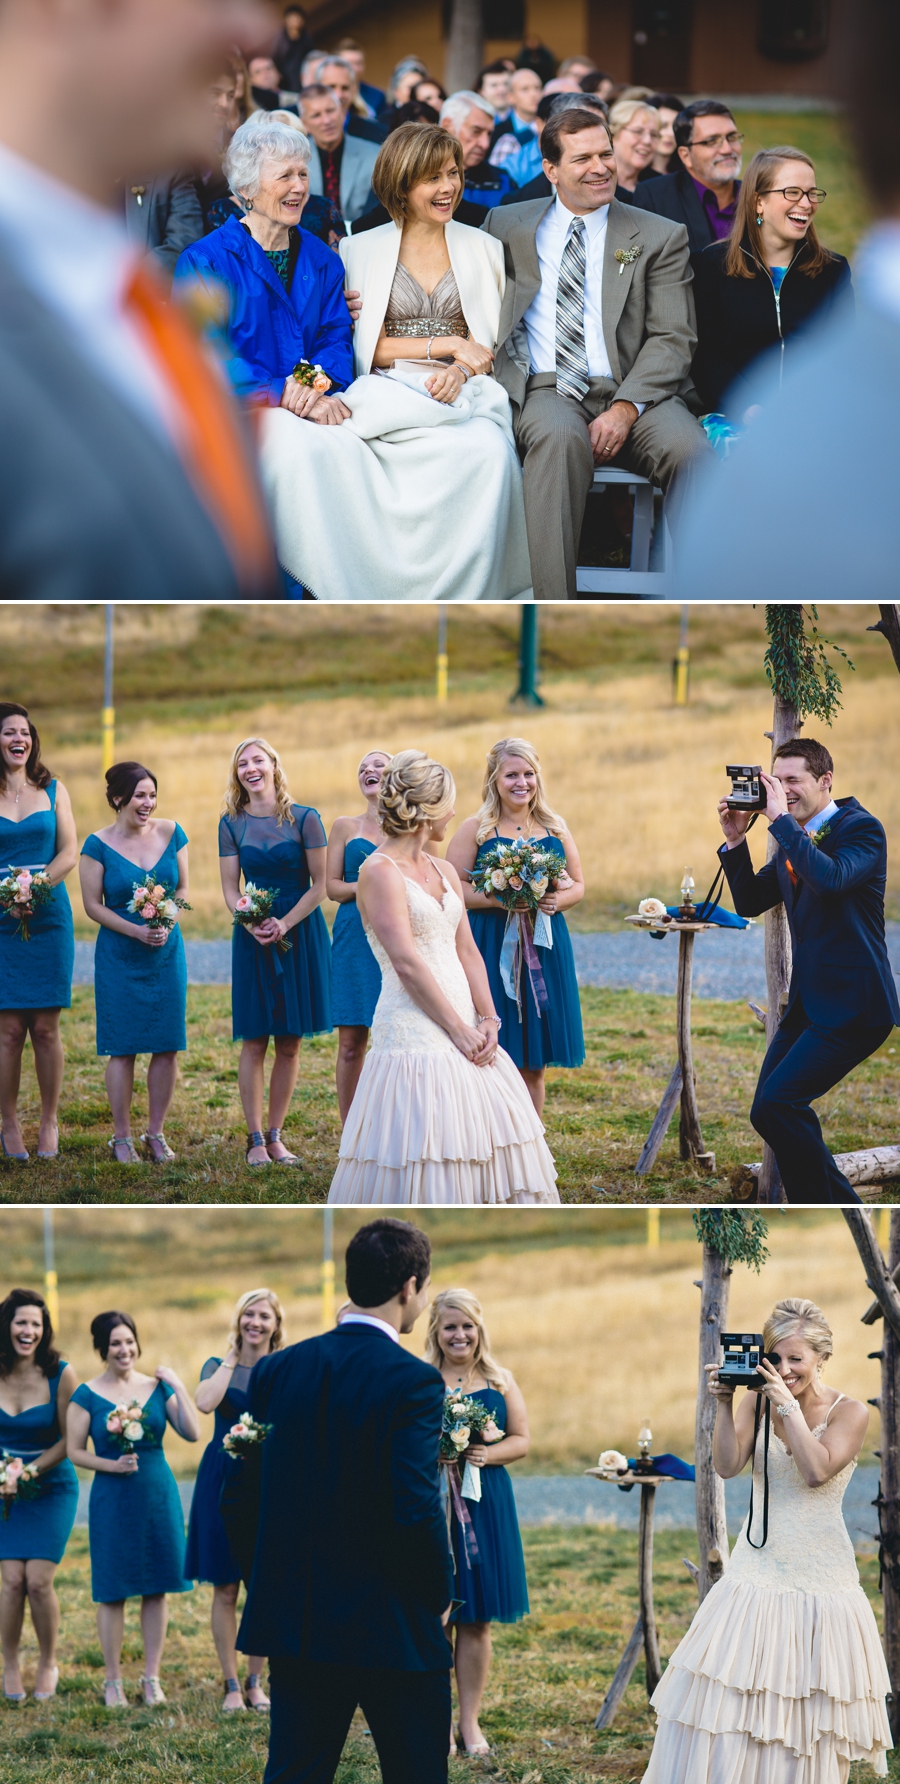 Pacific Northwest Fall Wedding at Crystal Mountain - Photography by Lucas Mobley - Teal Bridesmaids Dresses, Mountain Wedding Party Photos